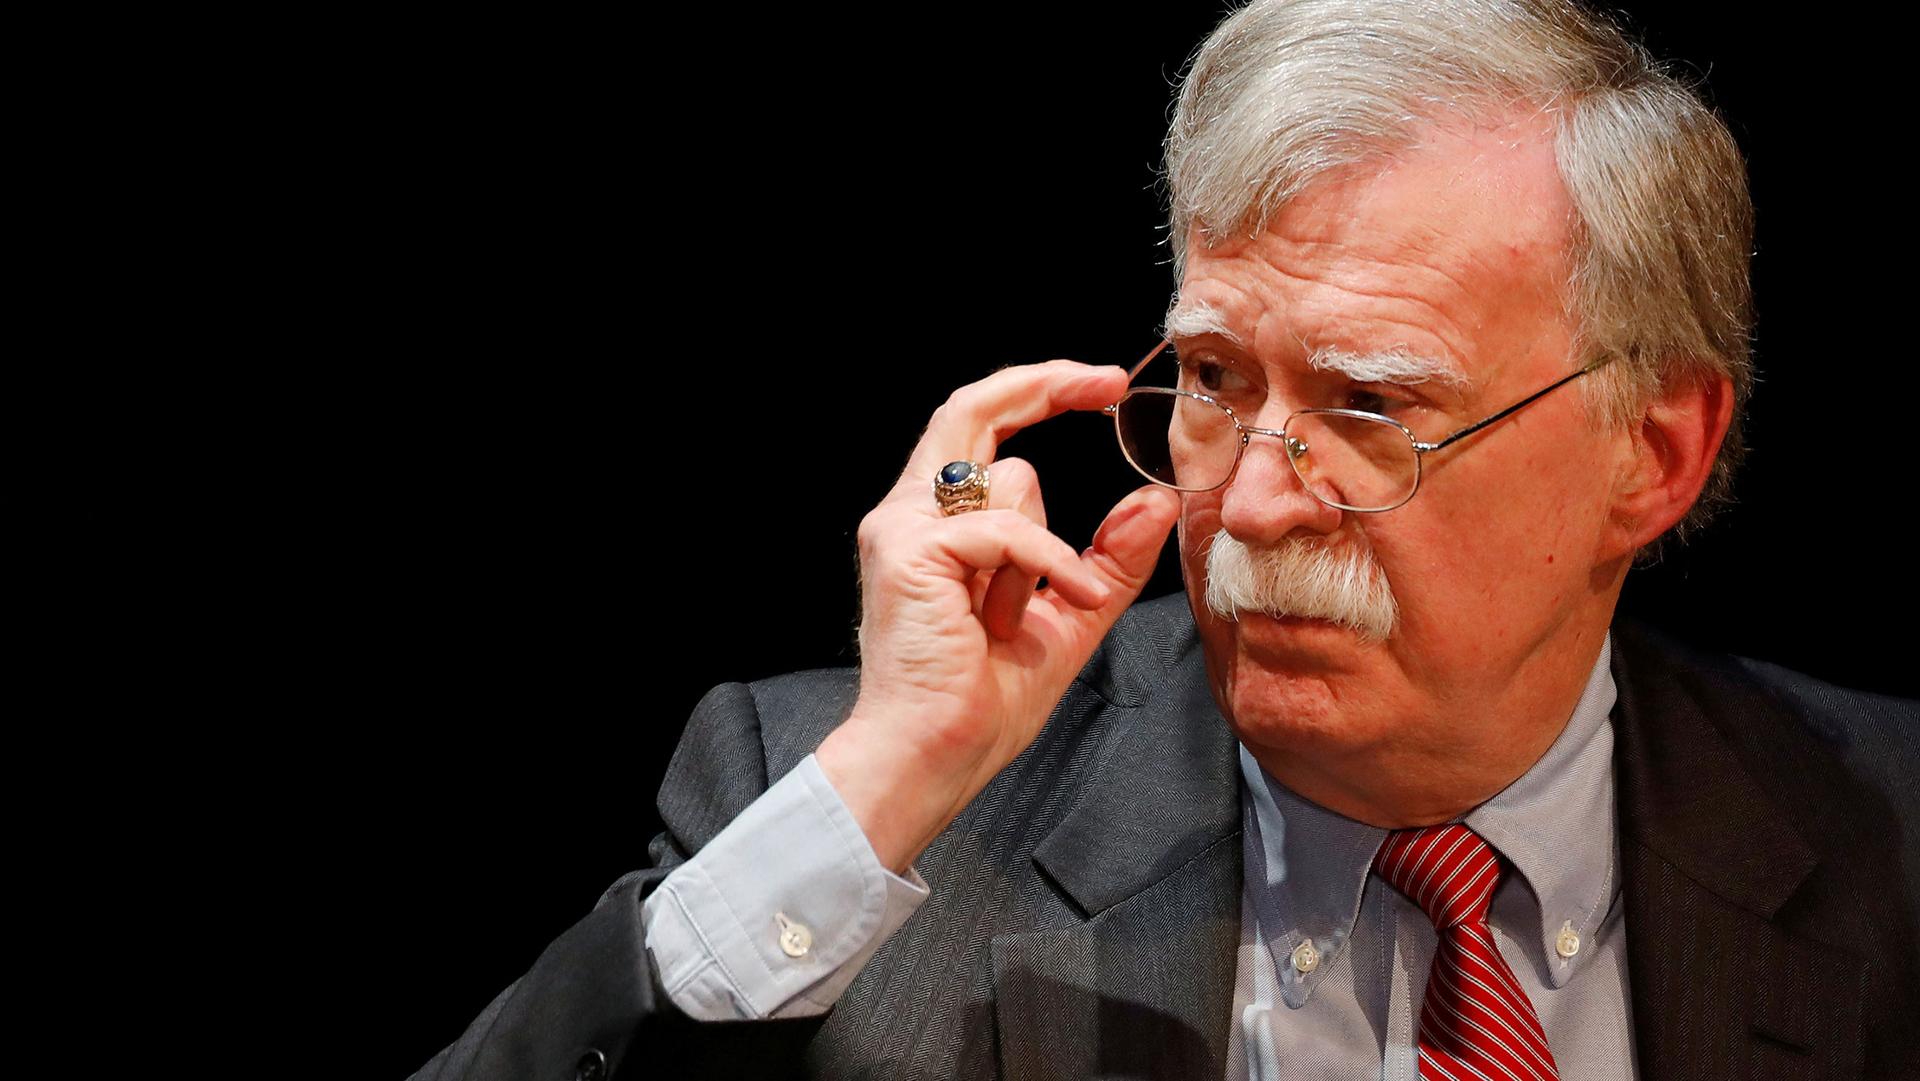 Former US national security advisor John Bolton is shown wearing a stripped suit and red tie and adjusting his glasses.